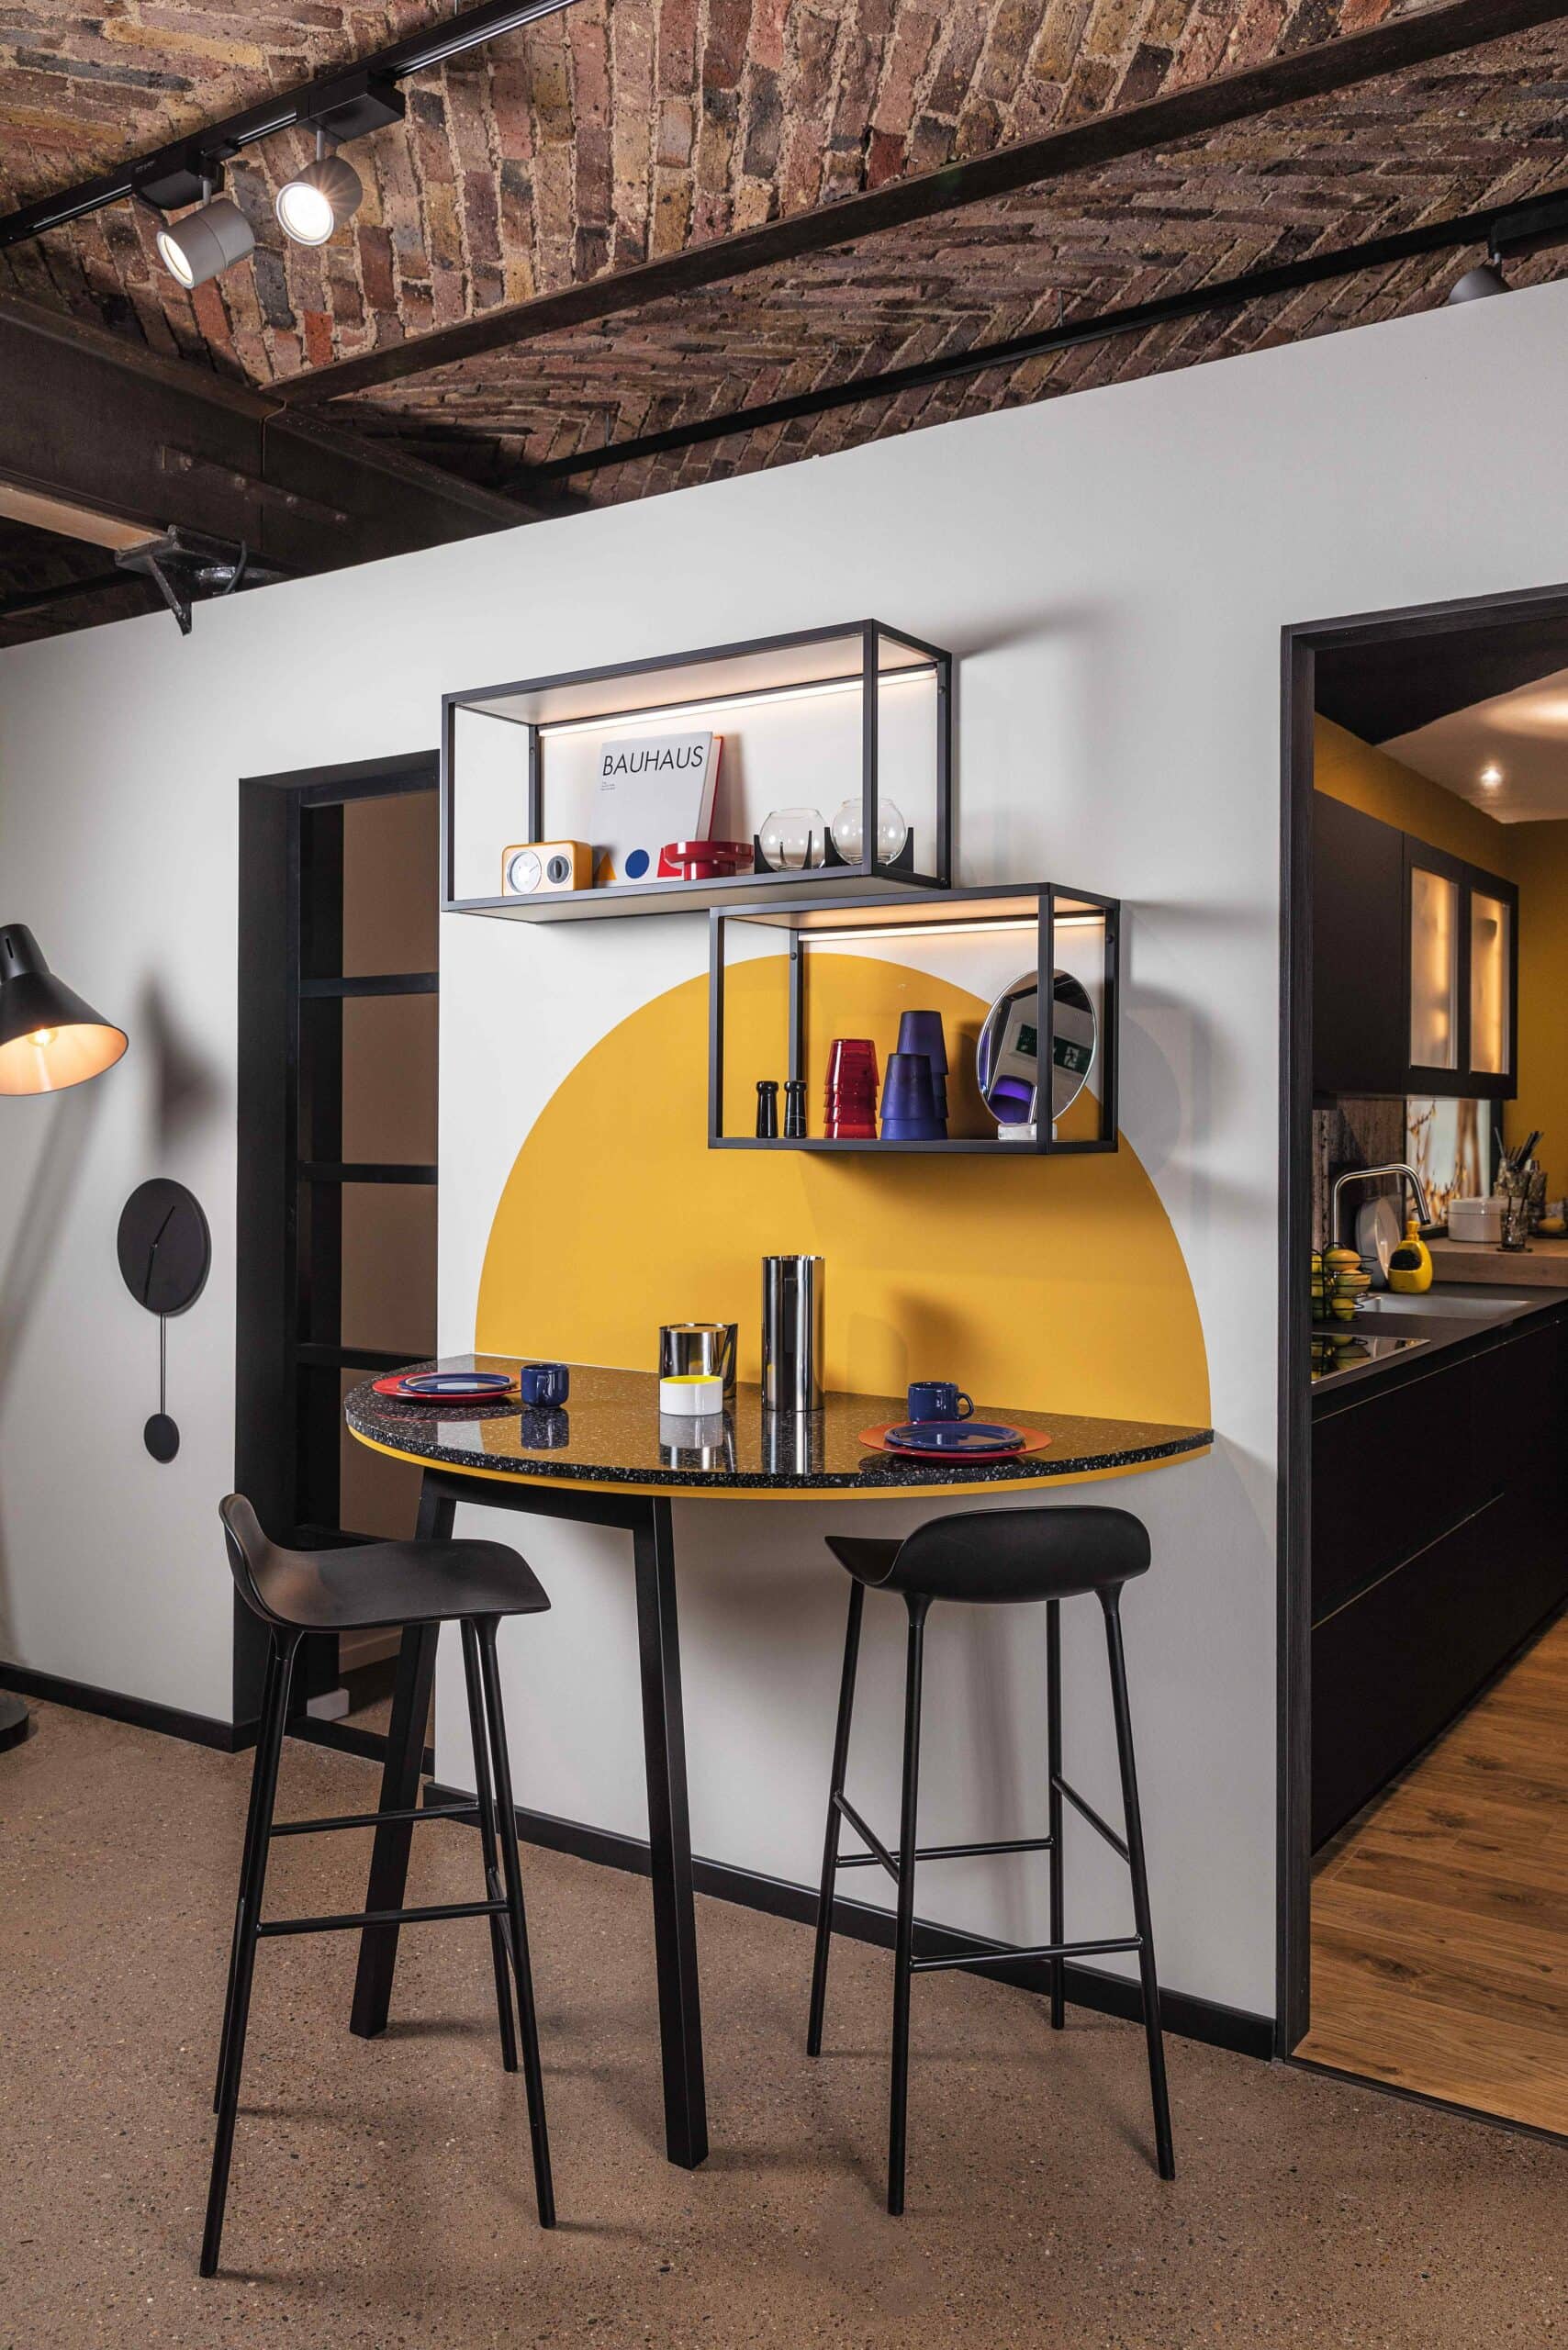 A modern kitchen with a small round table, two bar stools, and a yellow painted semicircle on the wall beneath open shelves holding various items. The space features an exposed brick ceiling and black accents, showcasing innovative solutions for small living rooms integrated into the design.